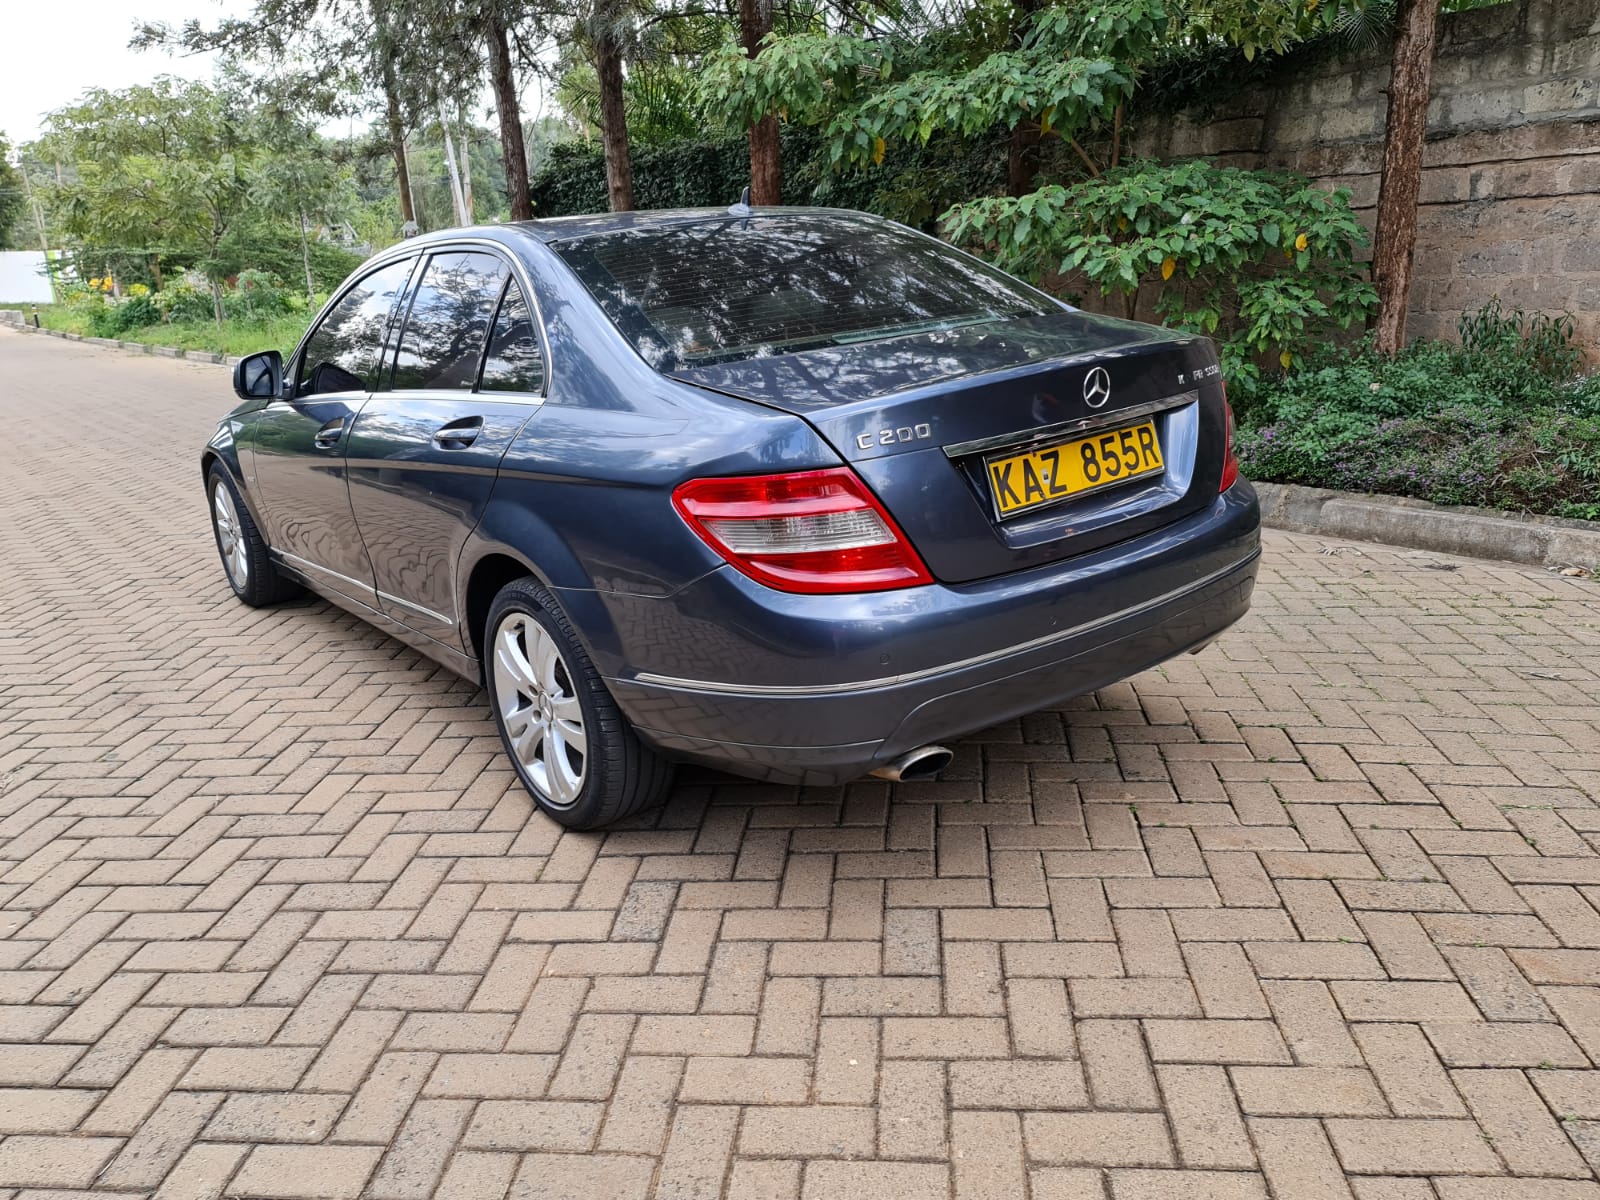 Mercedes Benz C200 Local 2007 on Offer As New